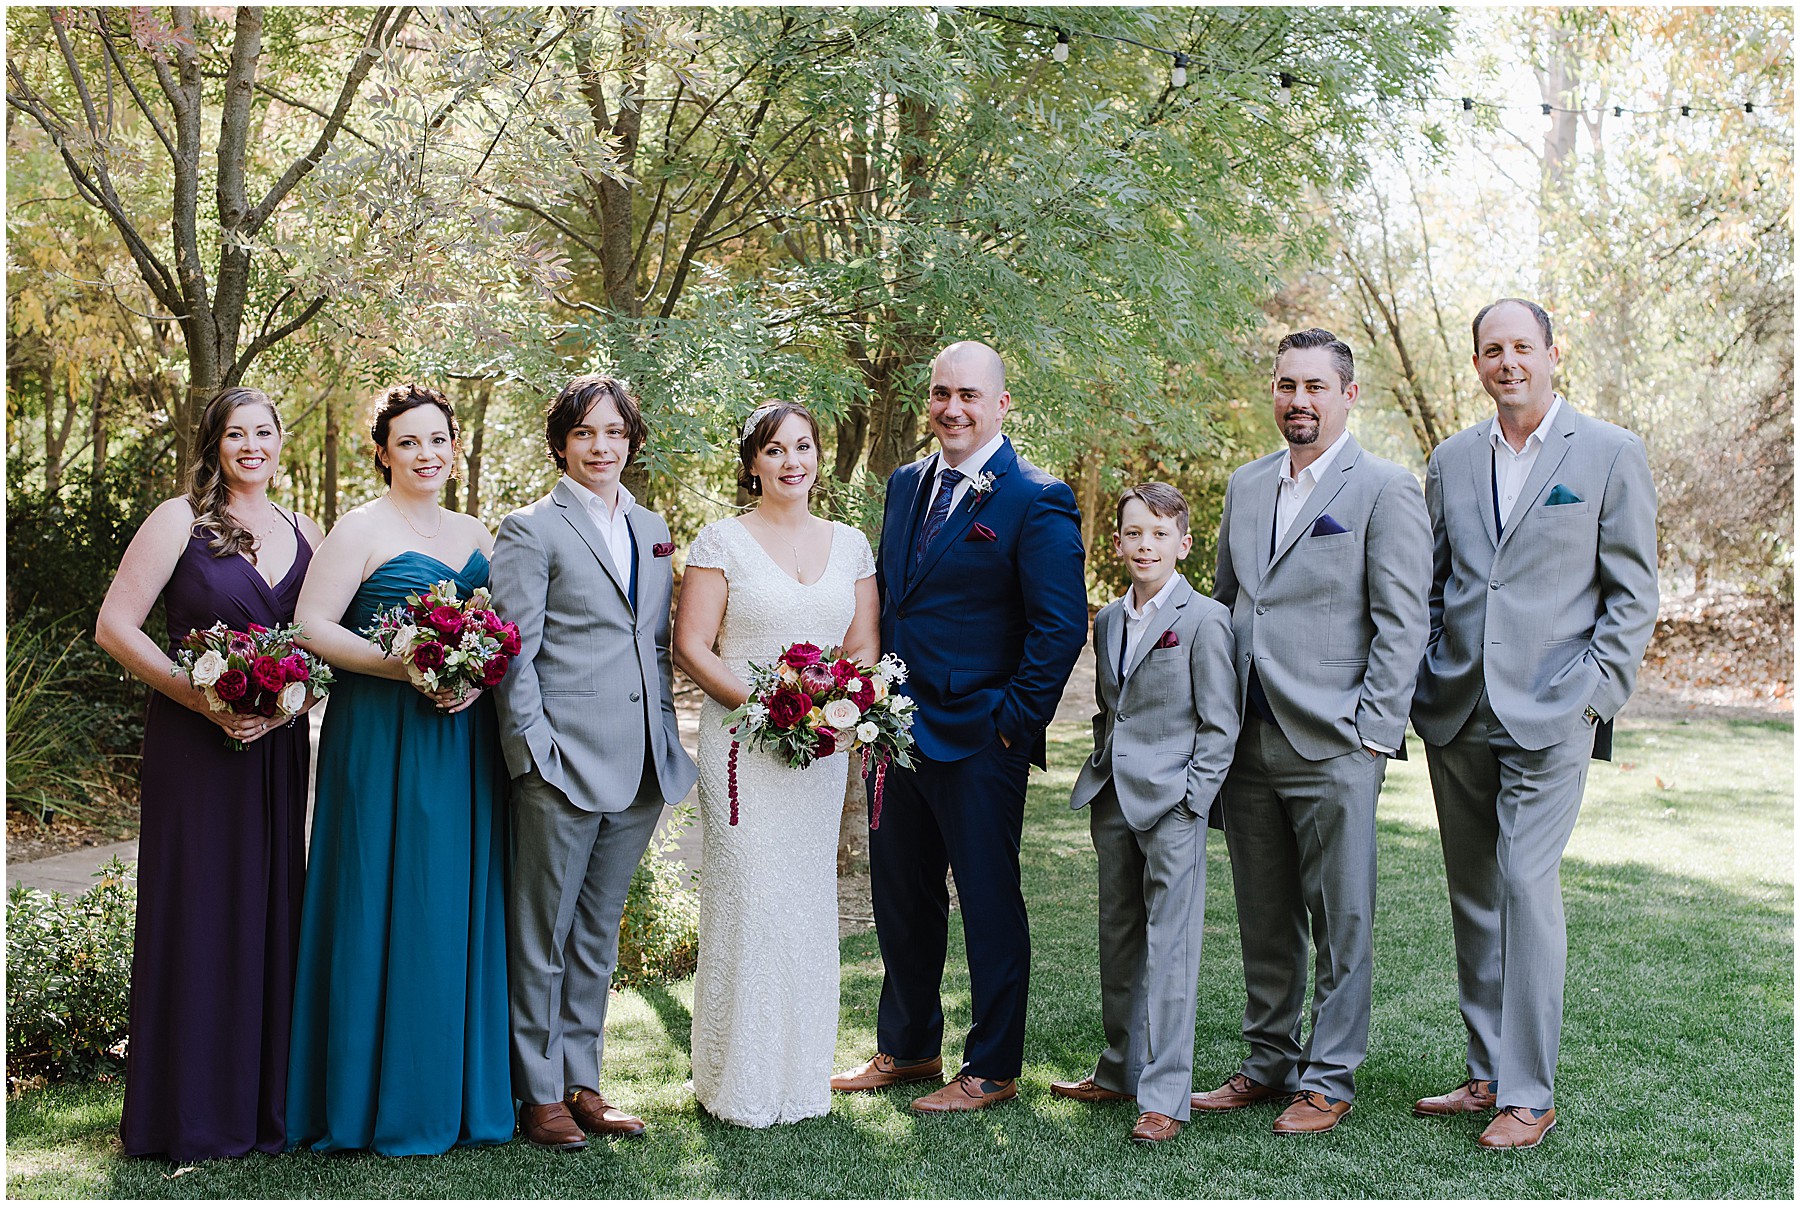 Hartley Farms California Wedding with jewel tones and rustic accents